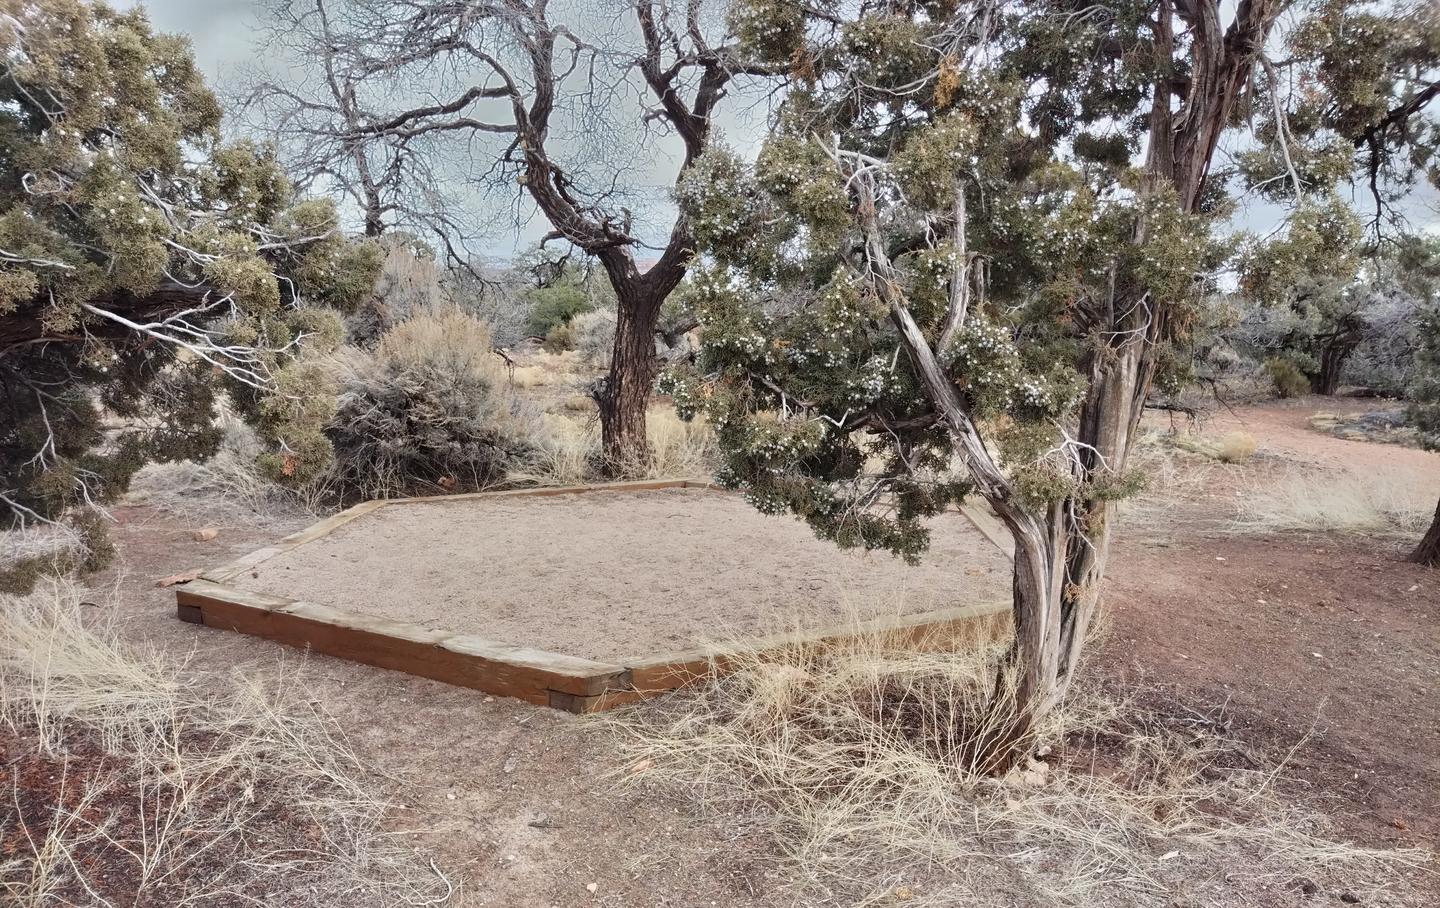 Small tent pad surrounded by junipers and grassSite 7 has two tent pads, a picnic table and a metal fire ring. The site is surrounded by a pinon-juniper forest.